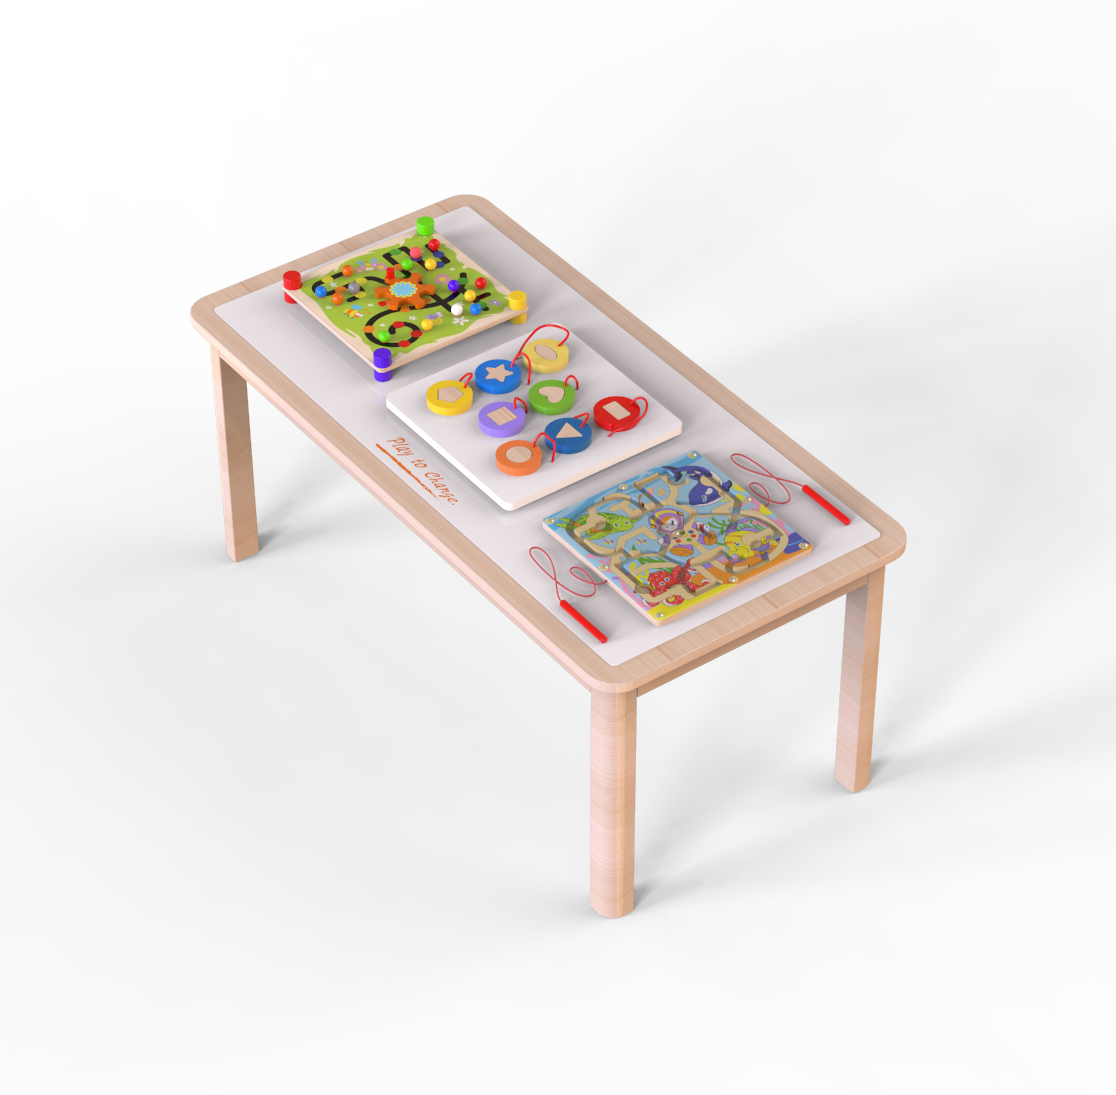 sturdy rubberwoodn table containing trace & trace game, shape-match board and magnetic bead trace game